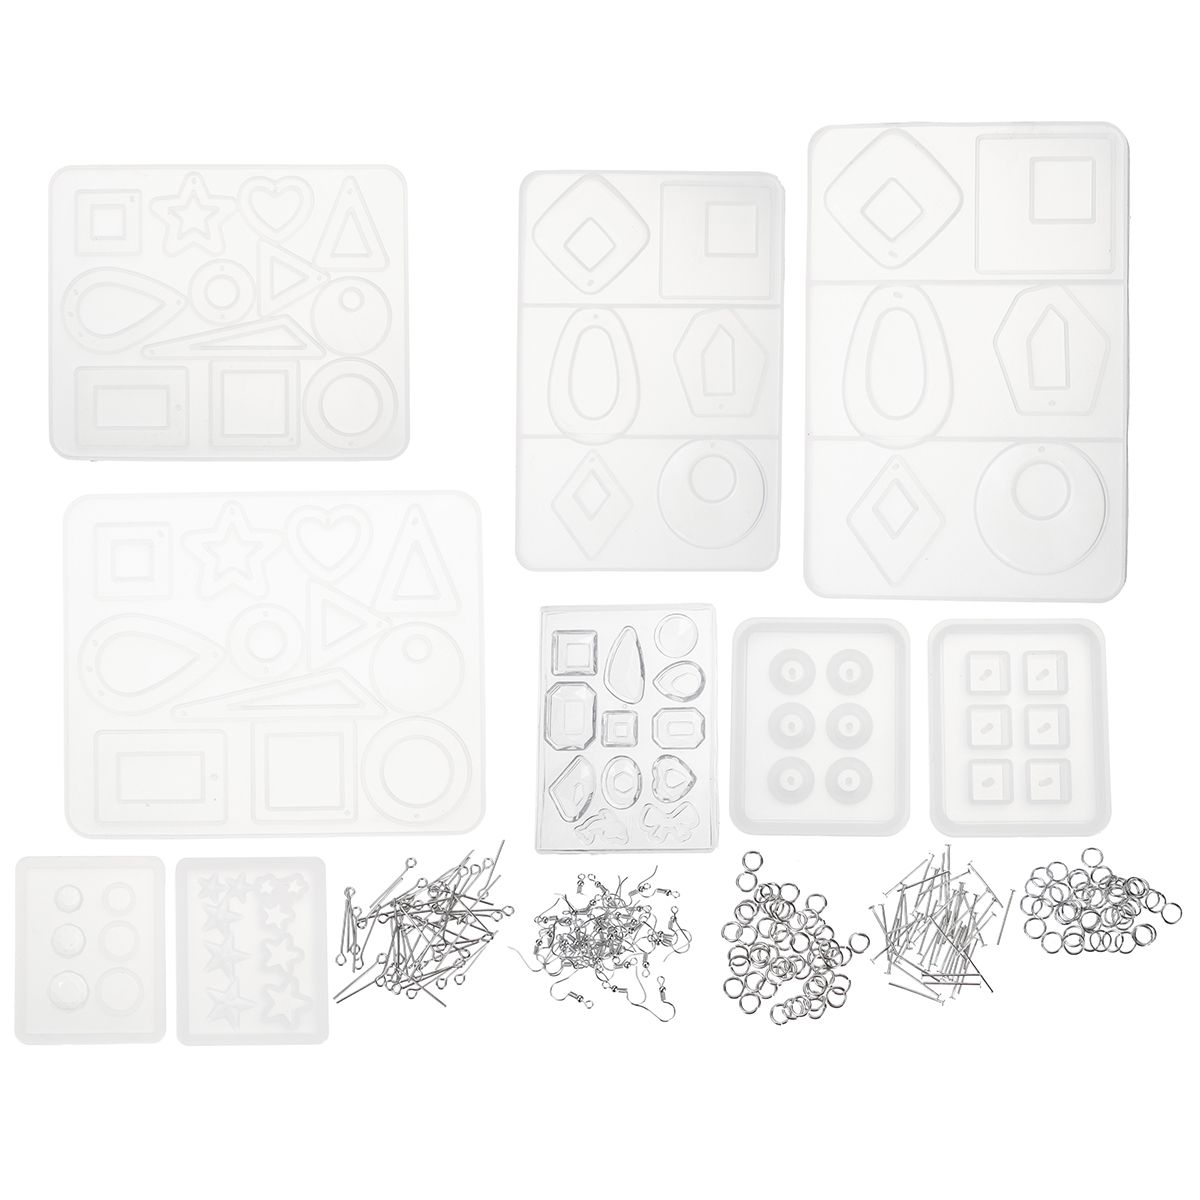 248PCS-Silicone-Earring-Pendant-Mold-Necklace-Jewelry-Resin-Mould-Casting-Craft-1704653